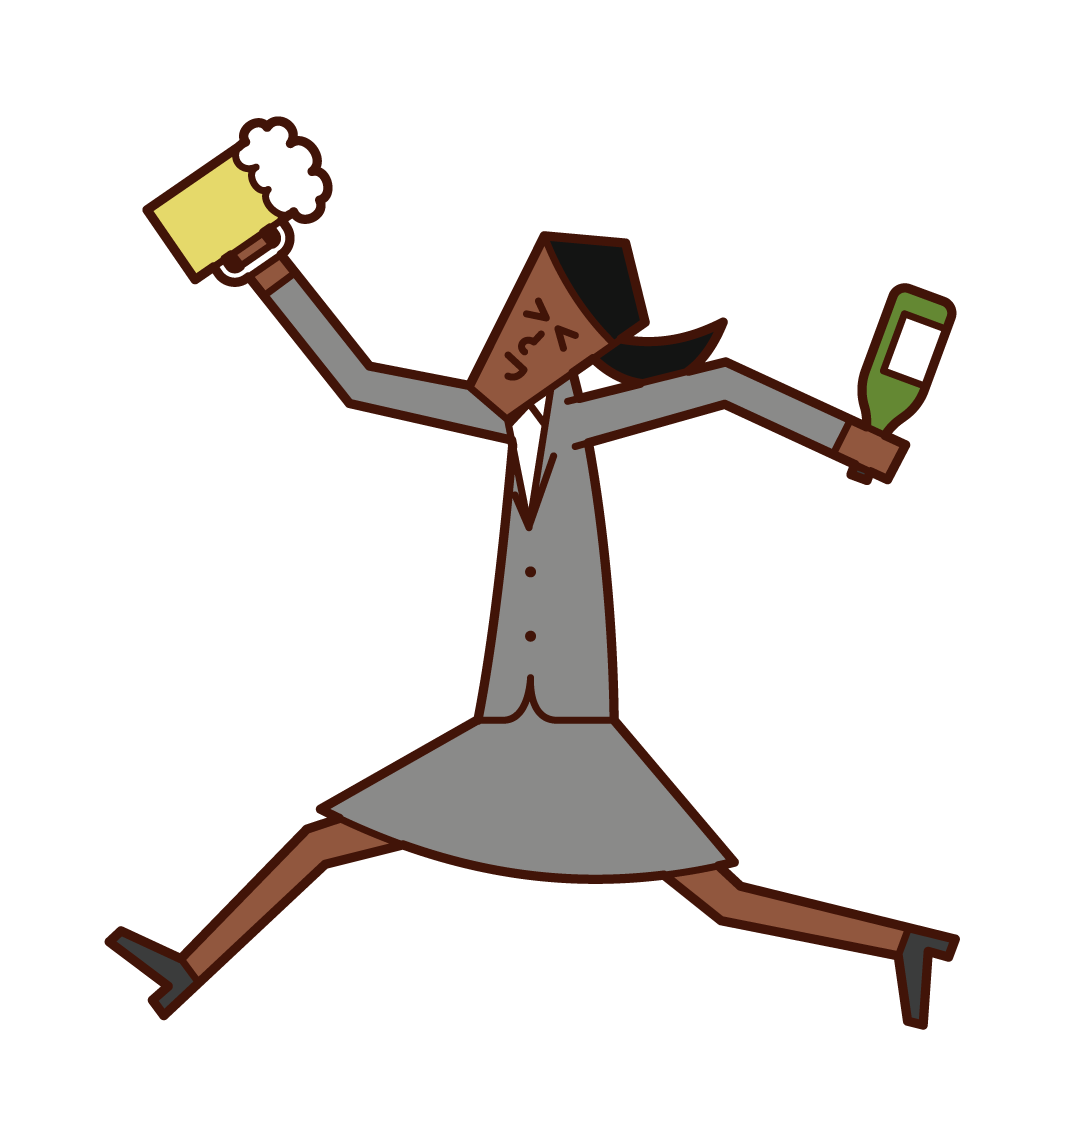 Illustration of a woman who drinks alcohol